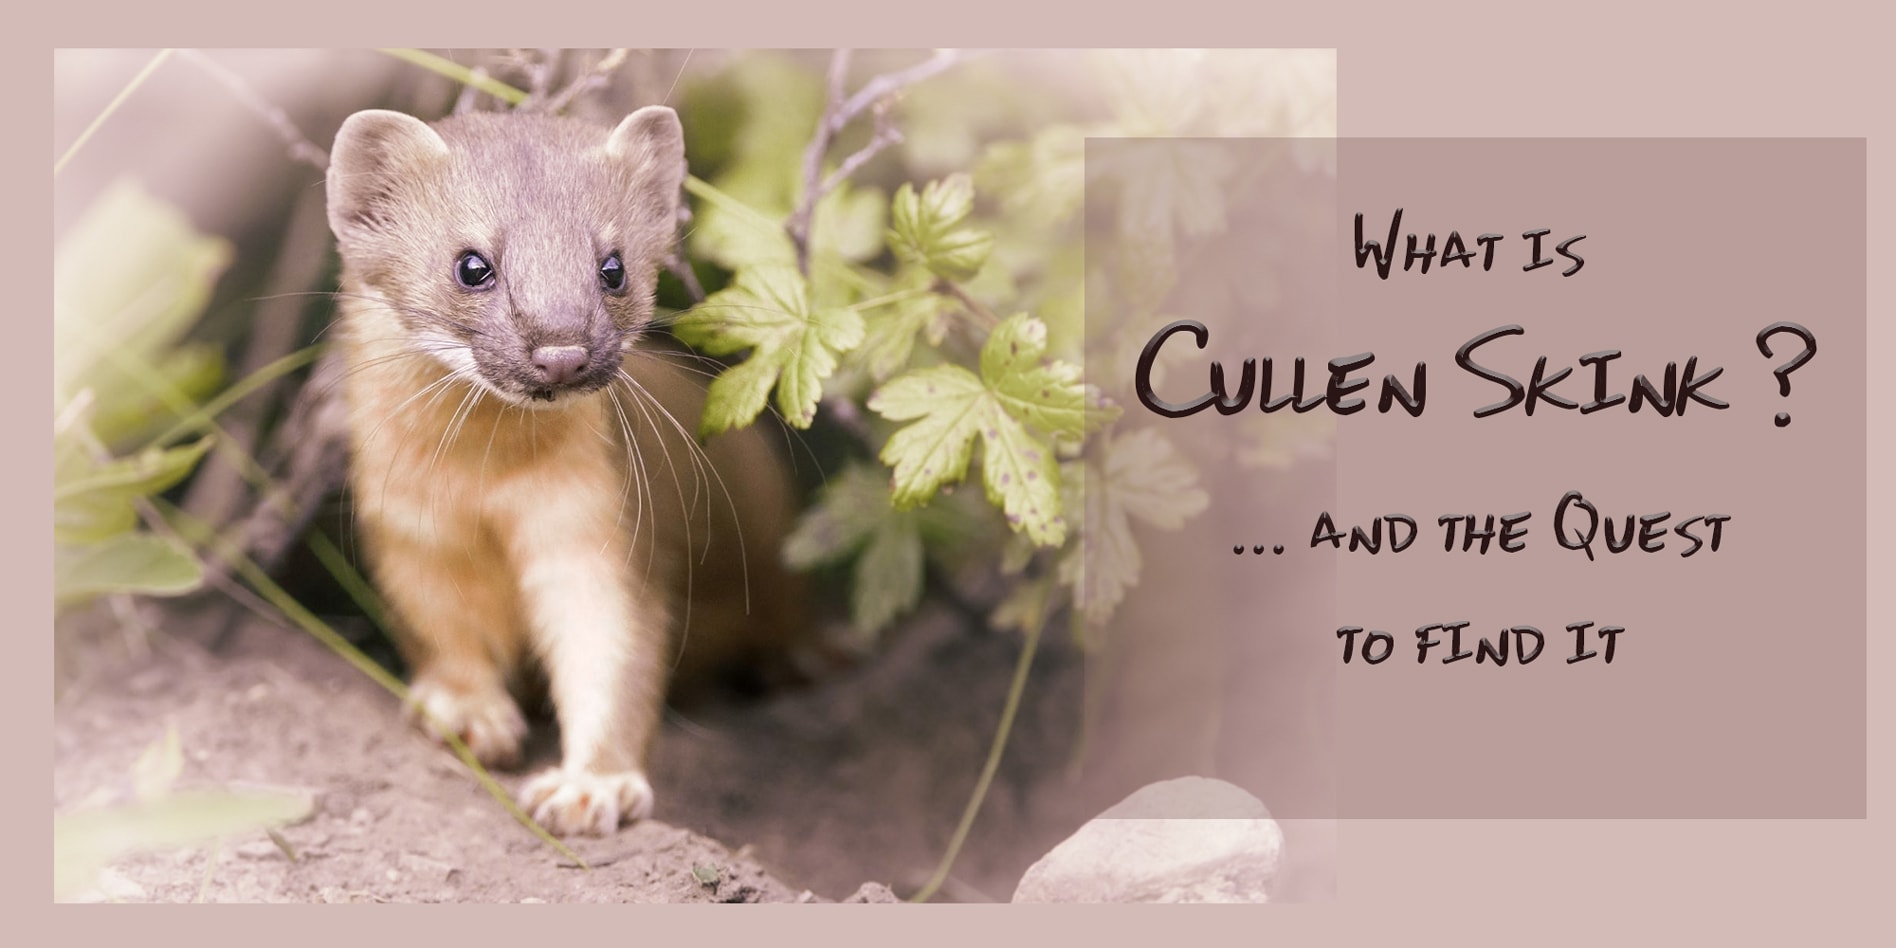 Cullen Skink header photoof a weasel and title of post